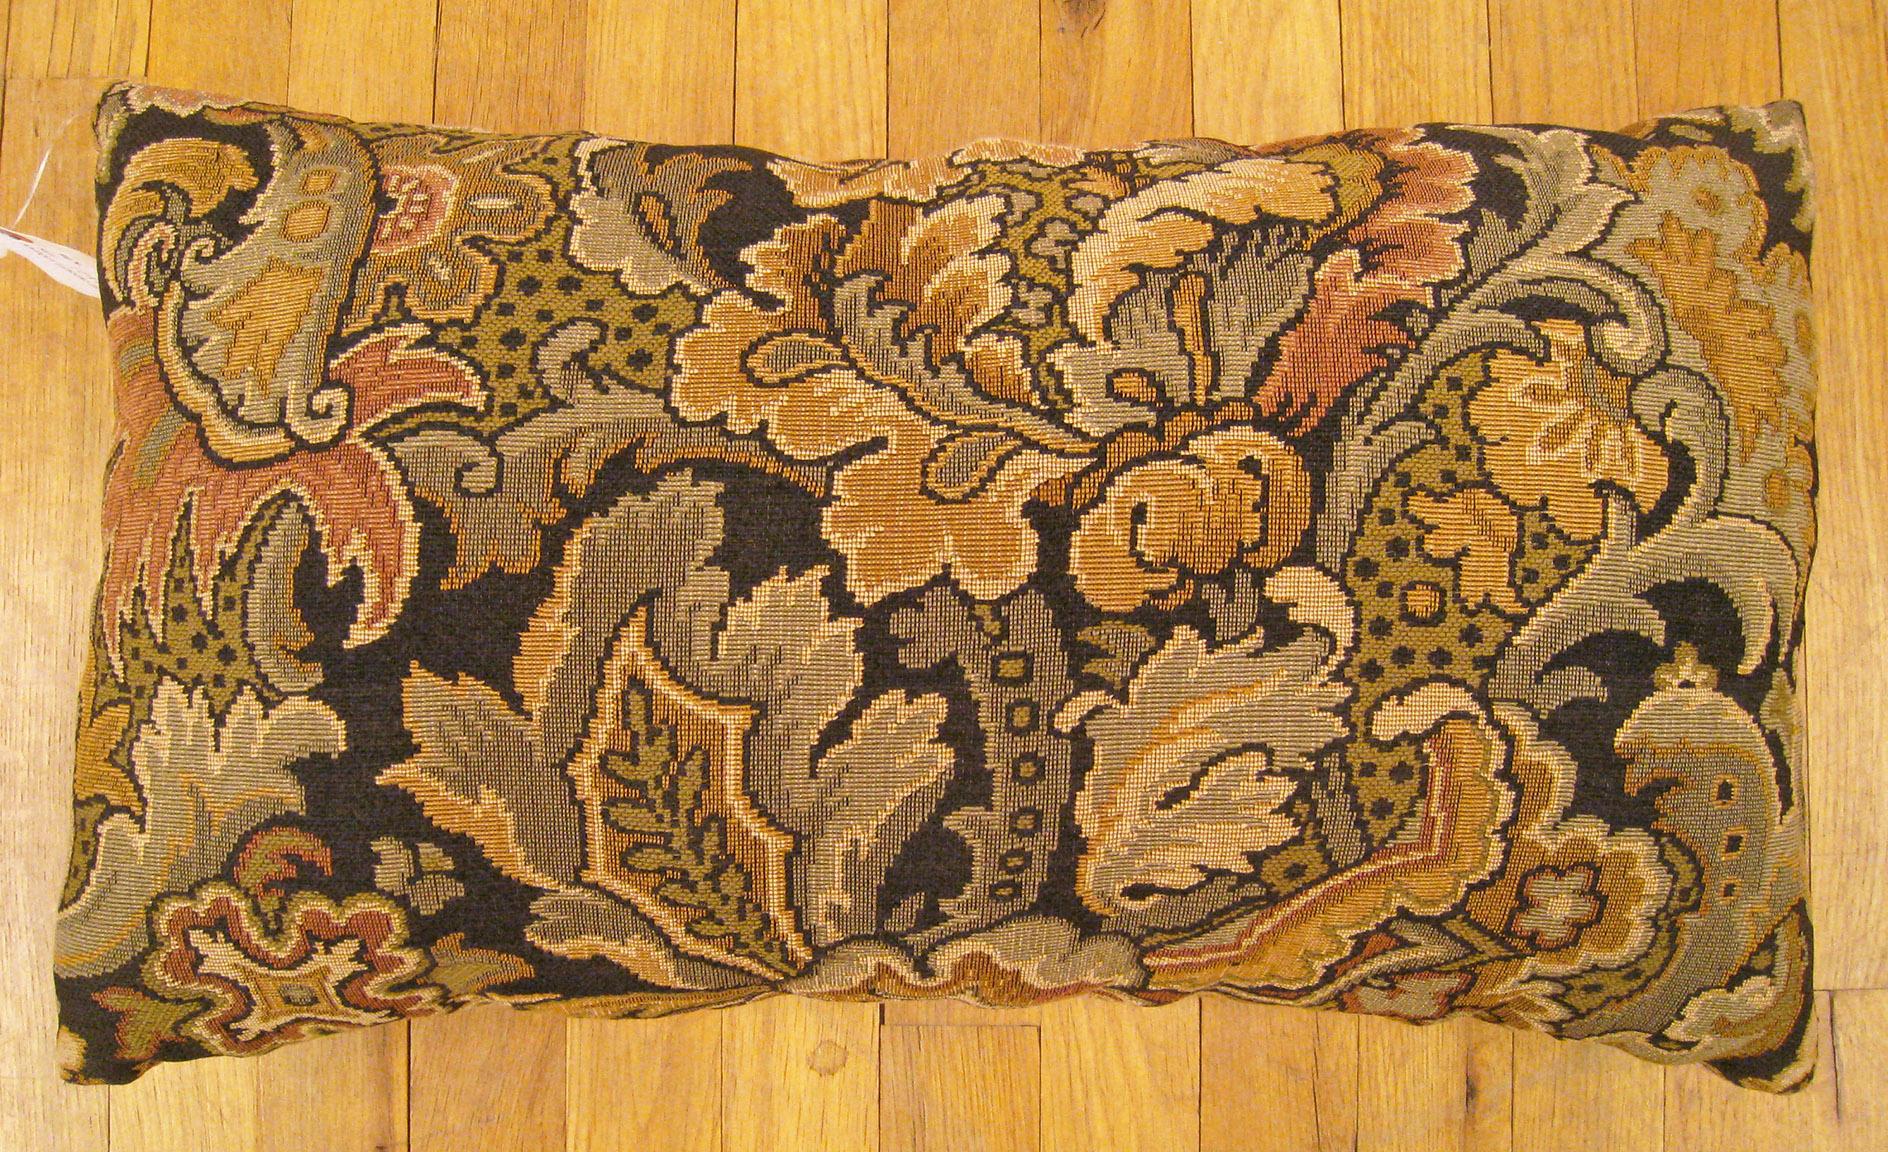 Antique Jacquard Tapestry Pillow; size 1'2” x 2'0”.

An antique decorative pillow with floral elements allover a gold green central field, size 1'2